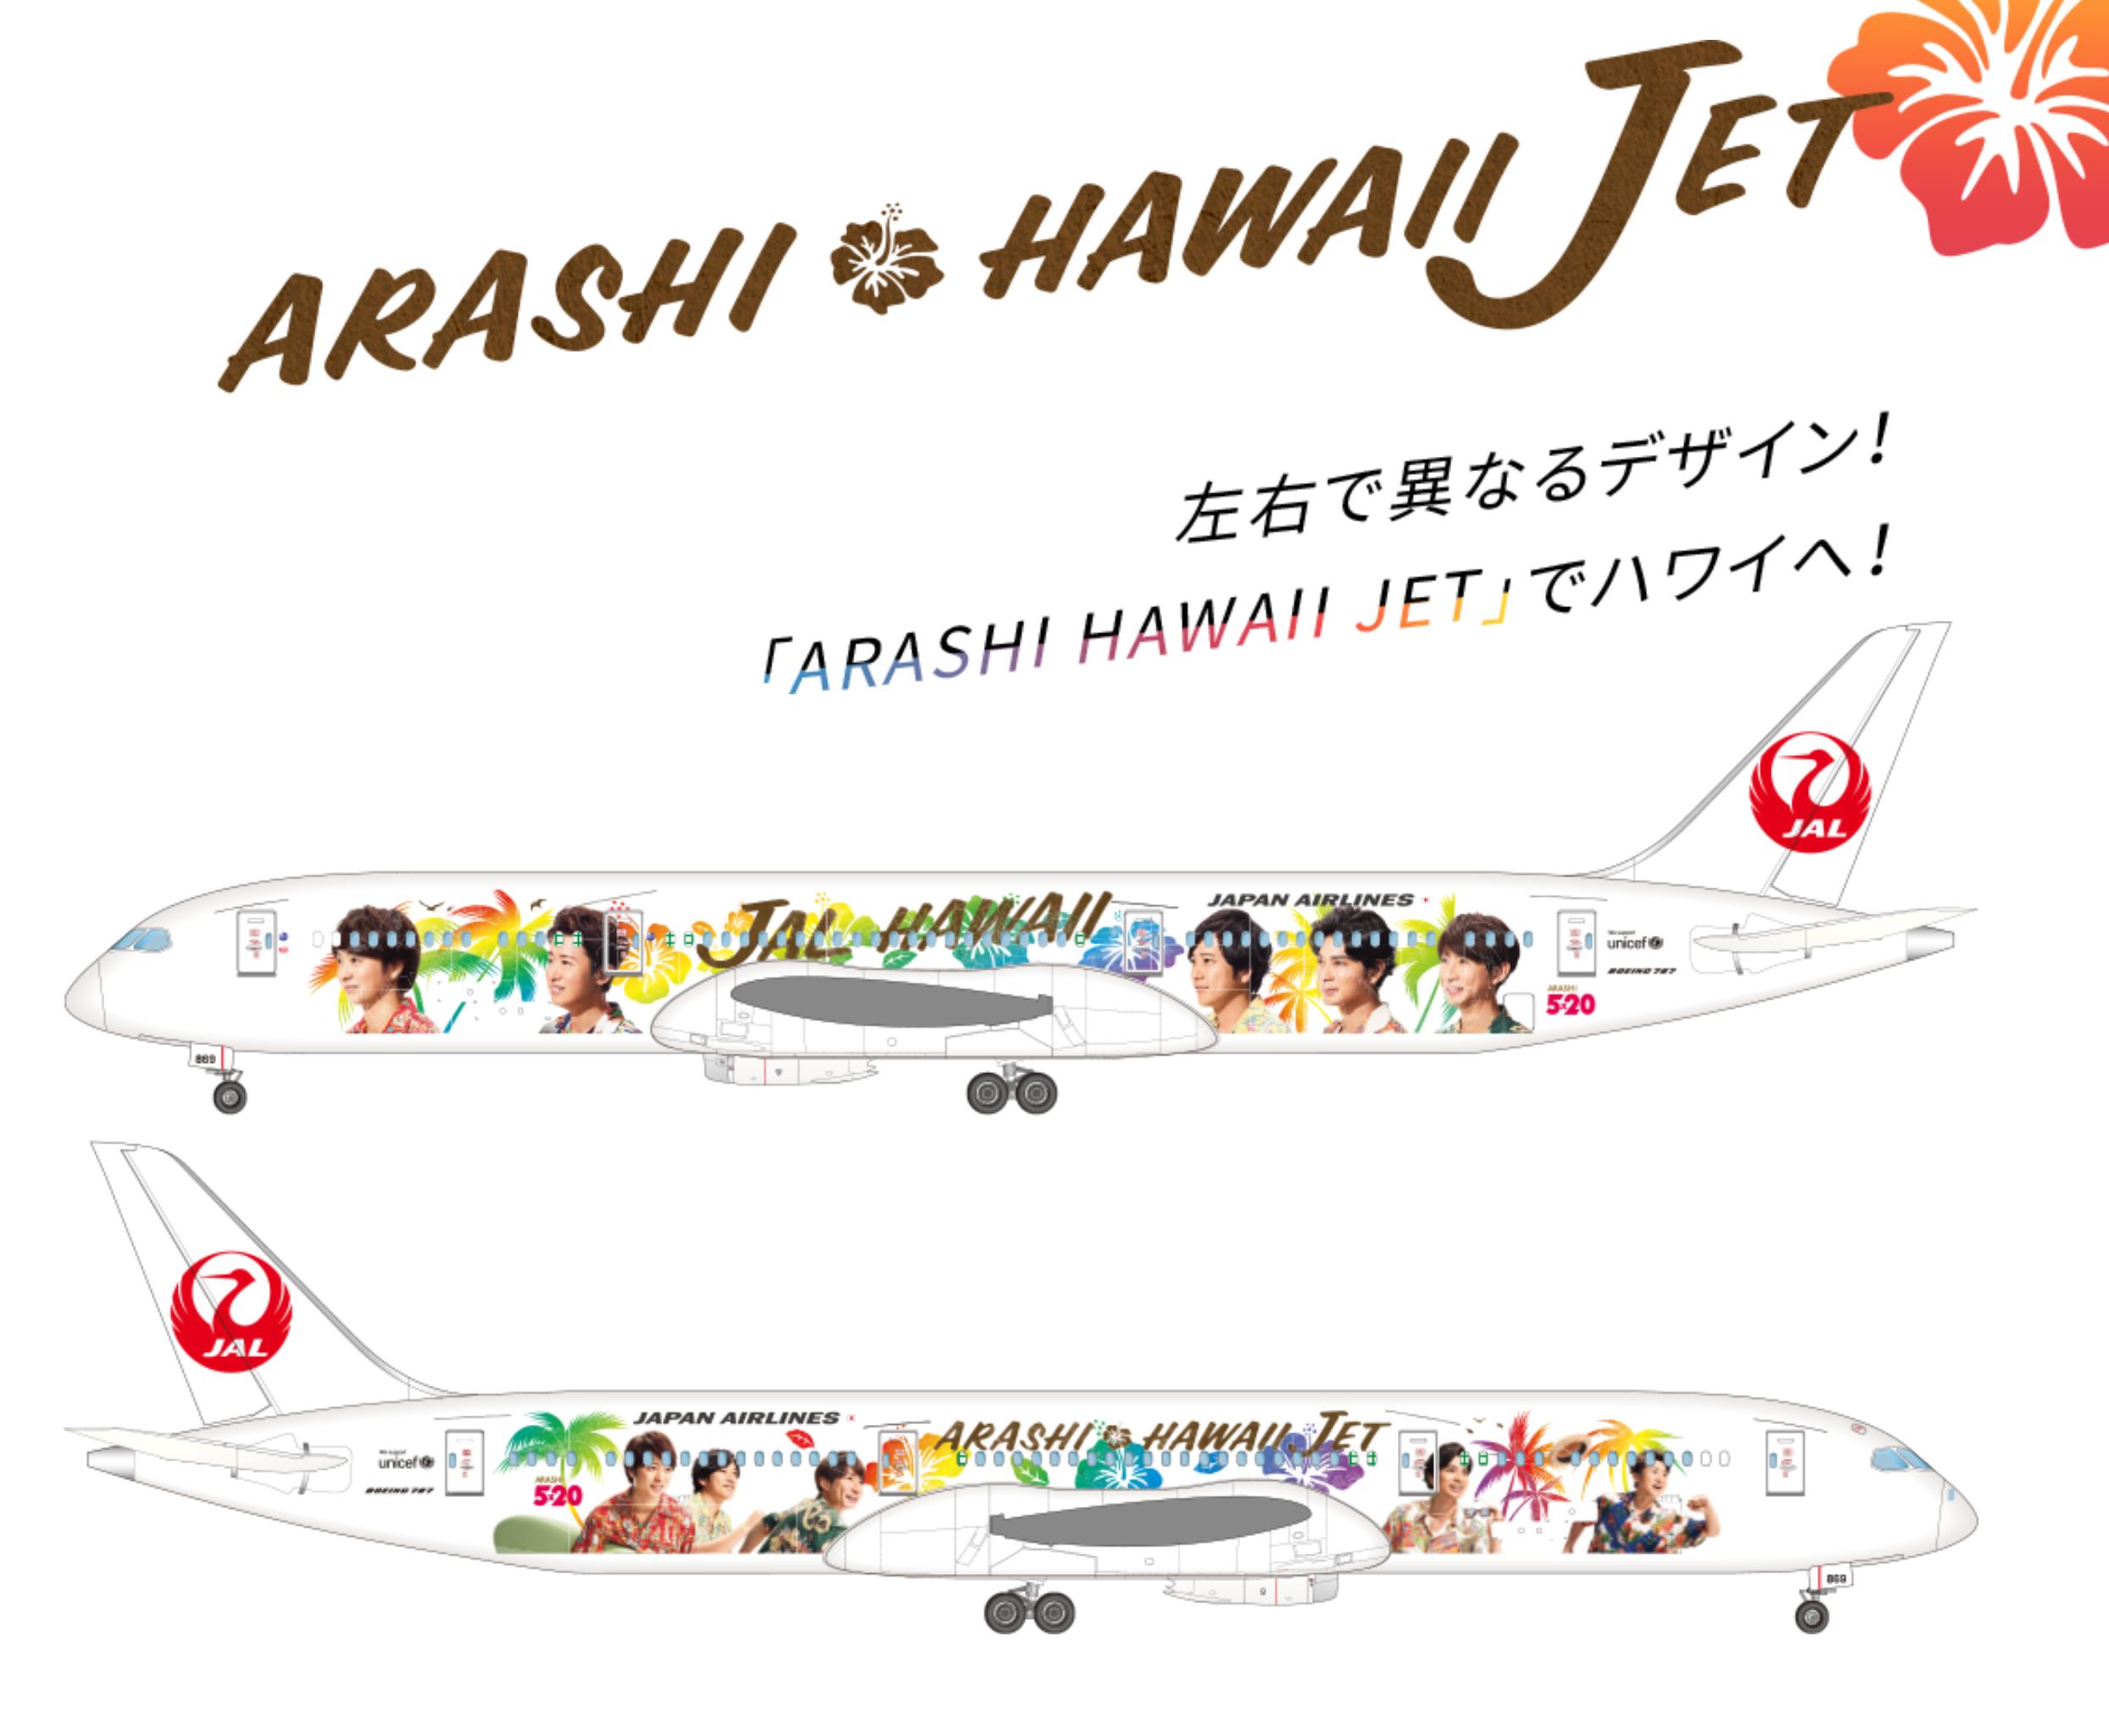 X 上的Airlineroute：「JAL on 22MAY19 inaugurated 